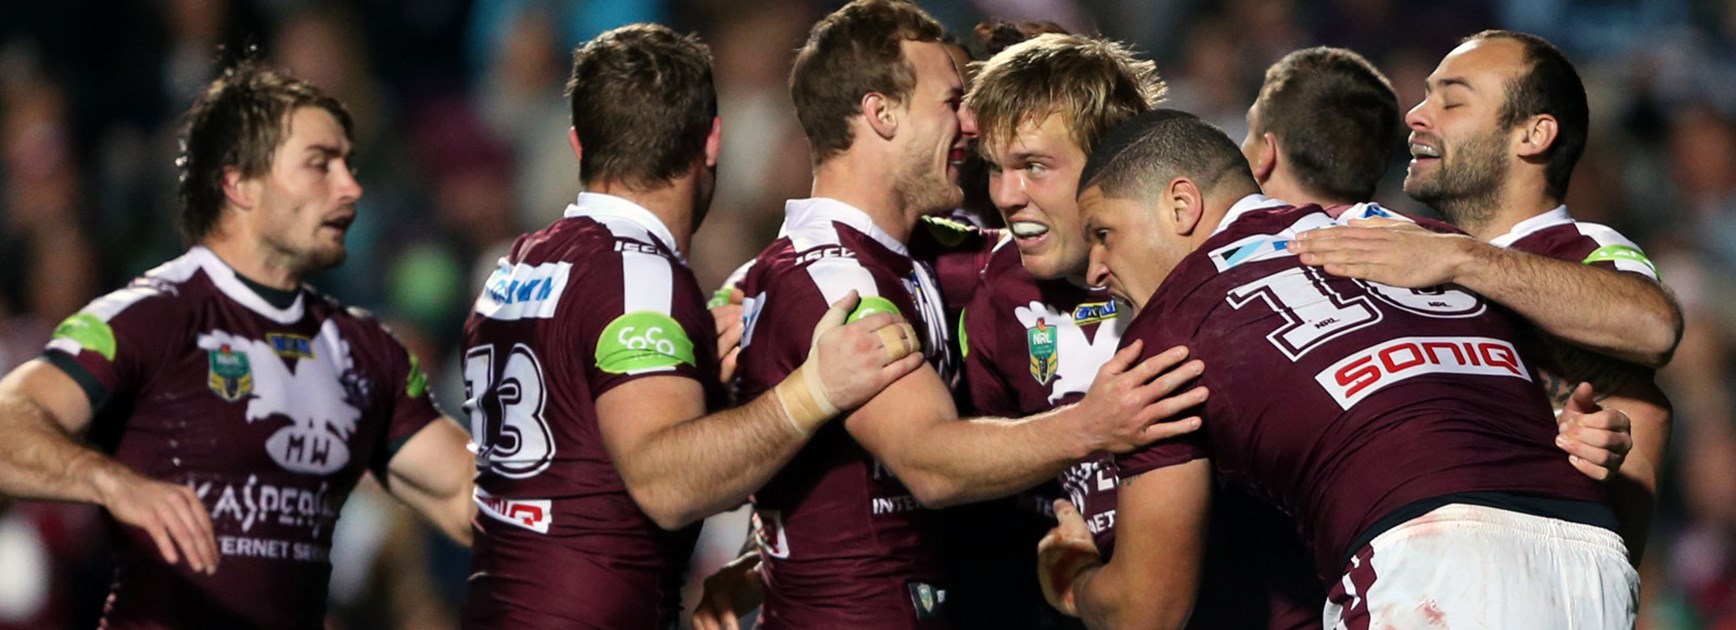 Manly players celebrate during their Round 22 win over the Rabbitohs.